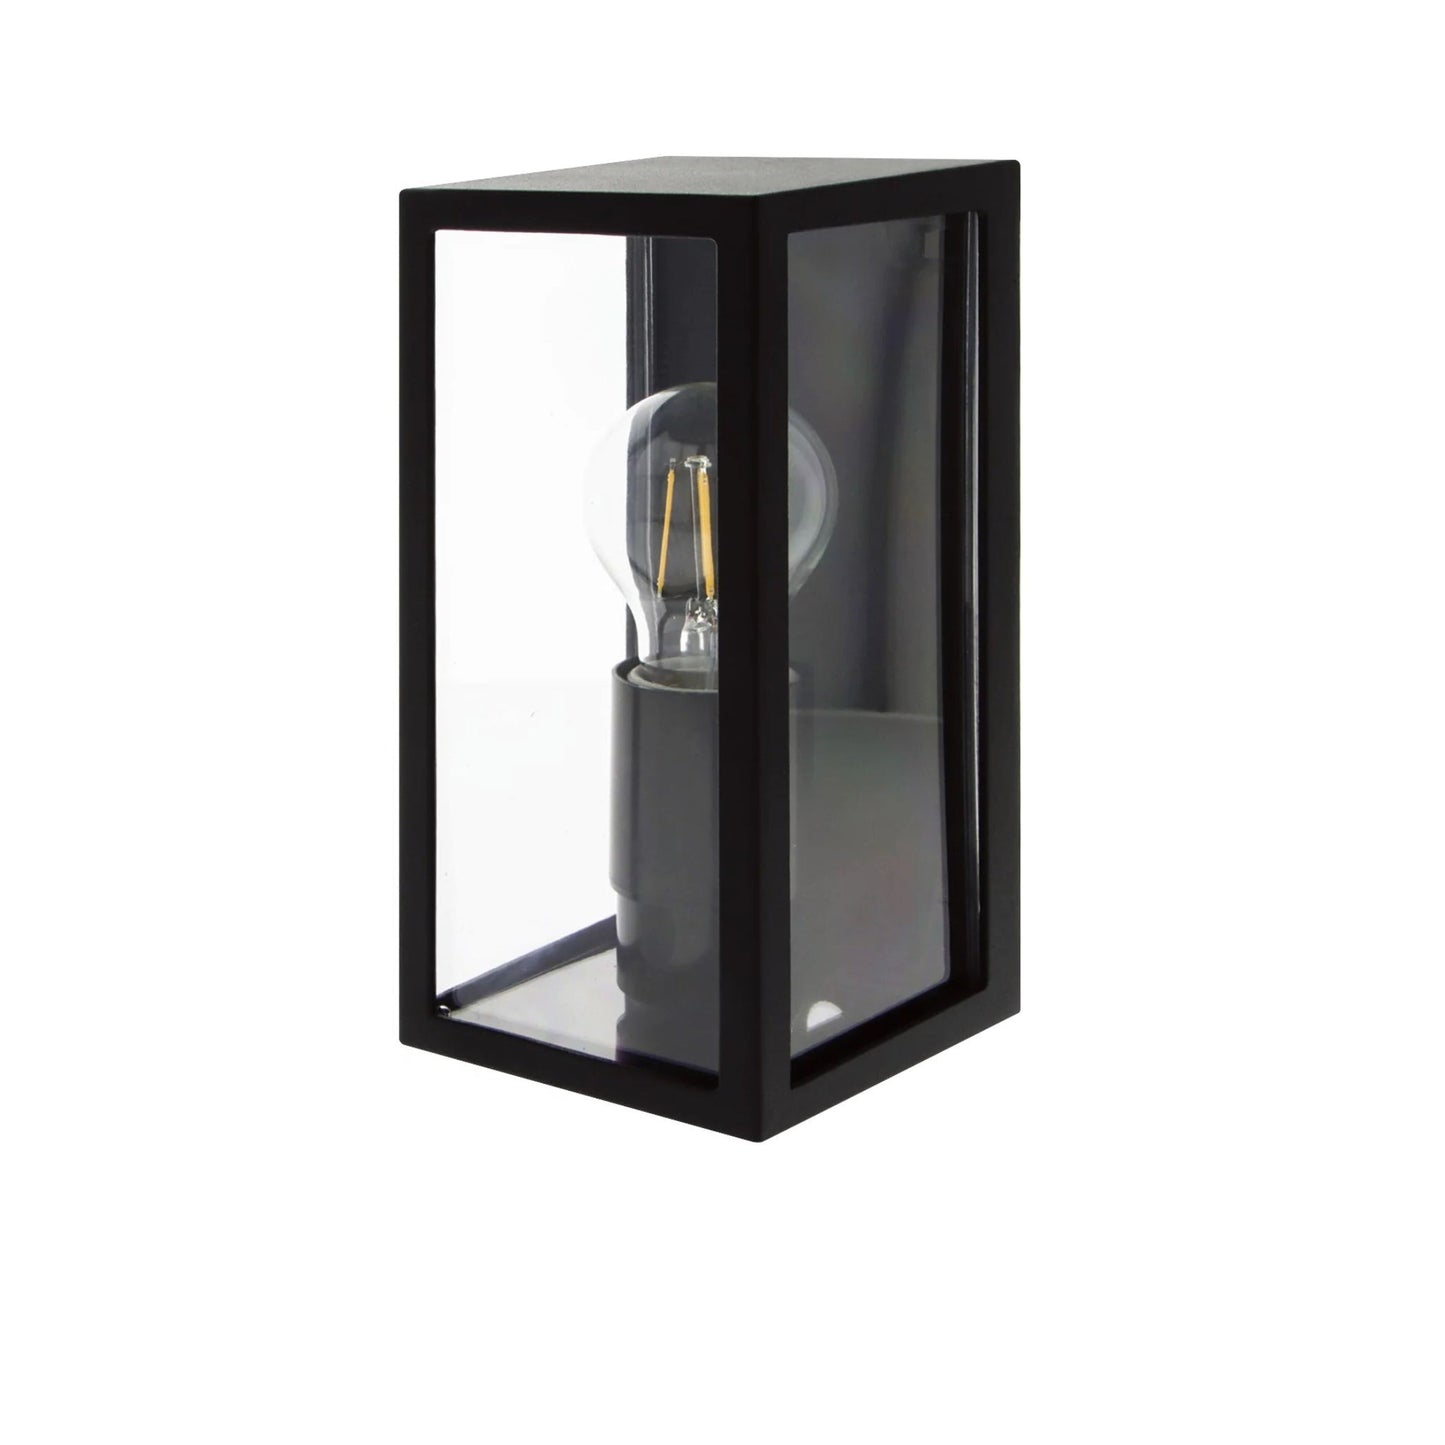 Our Marina black aluminum outdoor wall mounted lantern outdoor light with clear polycarbonate diffusers would look perfect in a modern or more traditional home design. Outside wall lights can provide atmospheric light in your garden, at the front door or on the terrace as well as a great security solution. It is designed for durability and longevity with its robust material producing a fully weatherproof and water resistant light fitting.